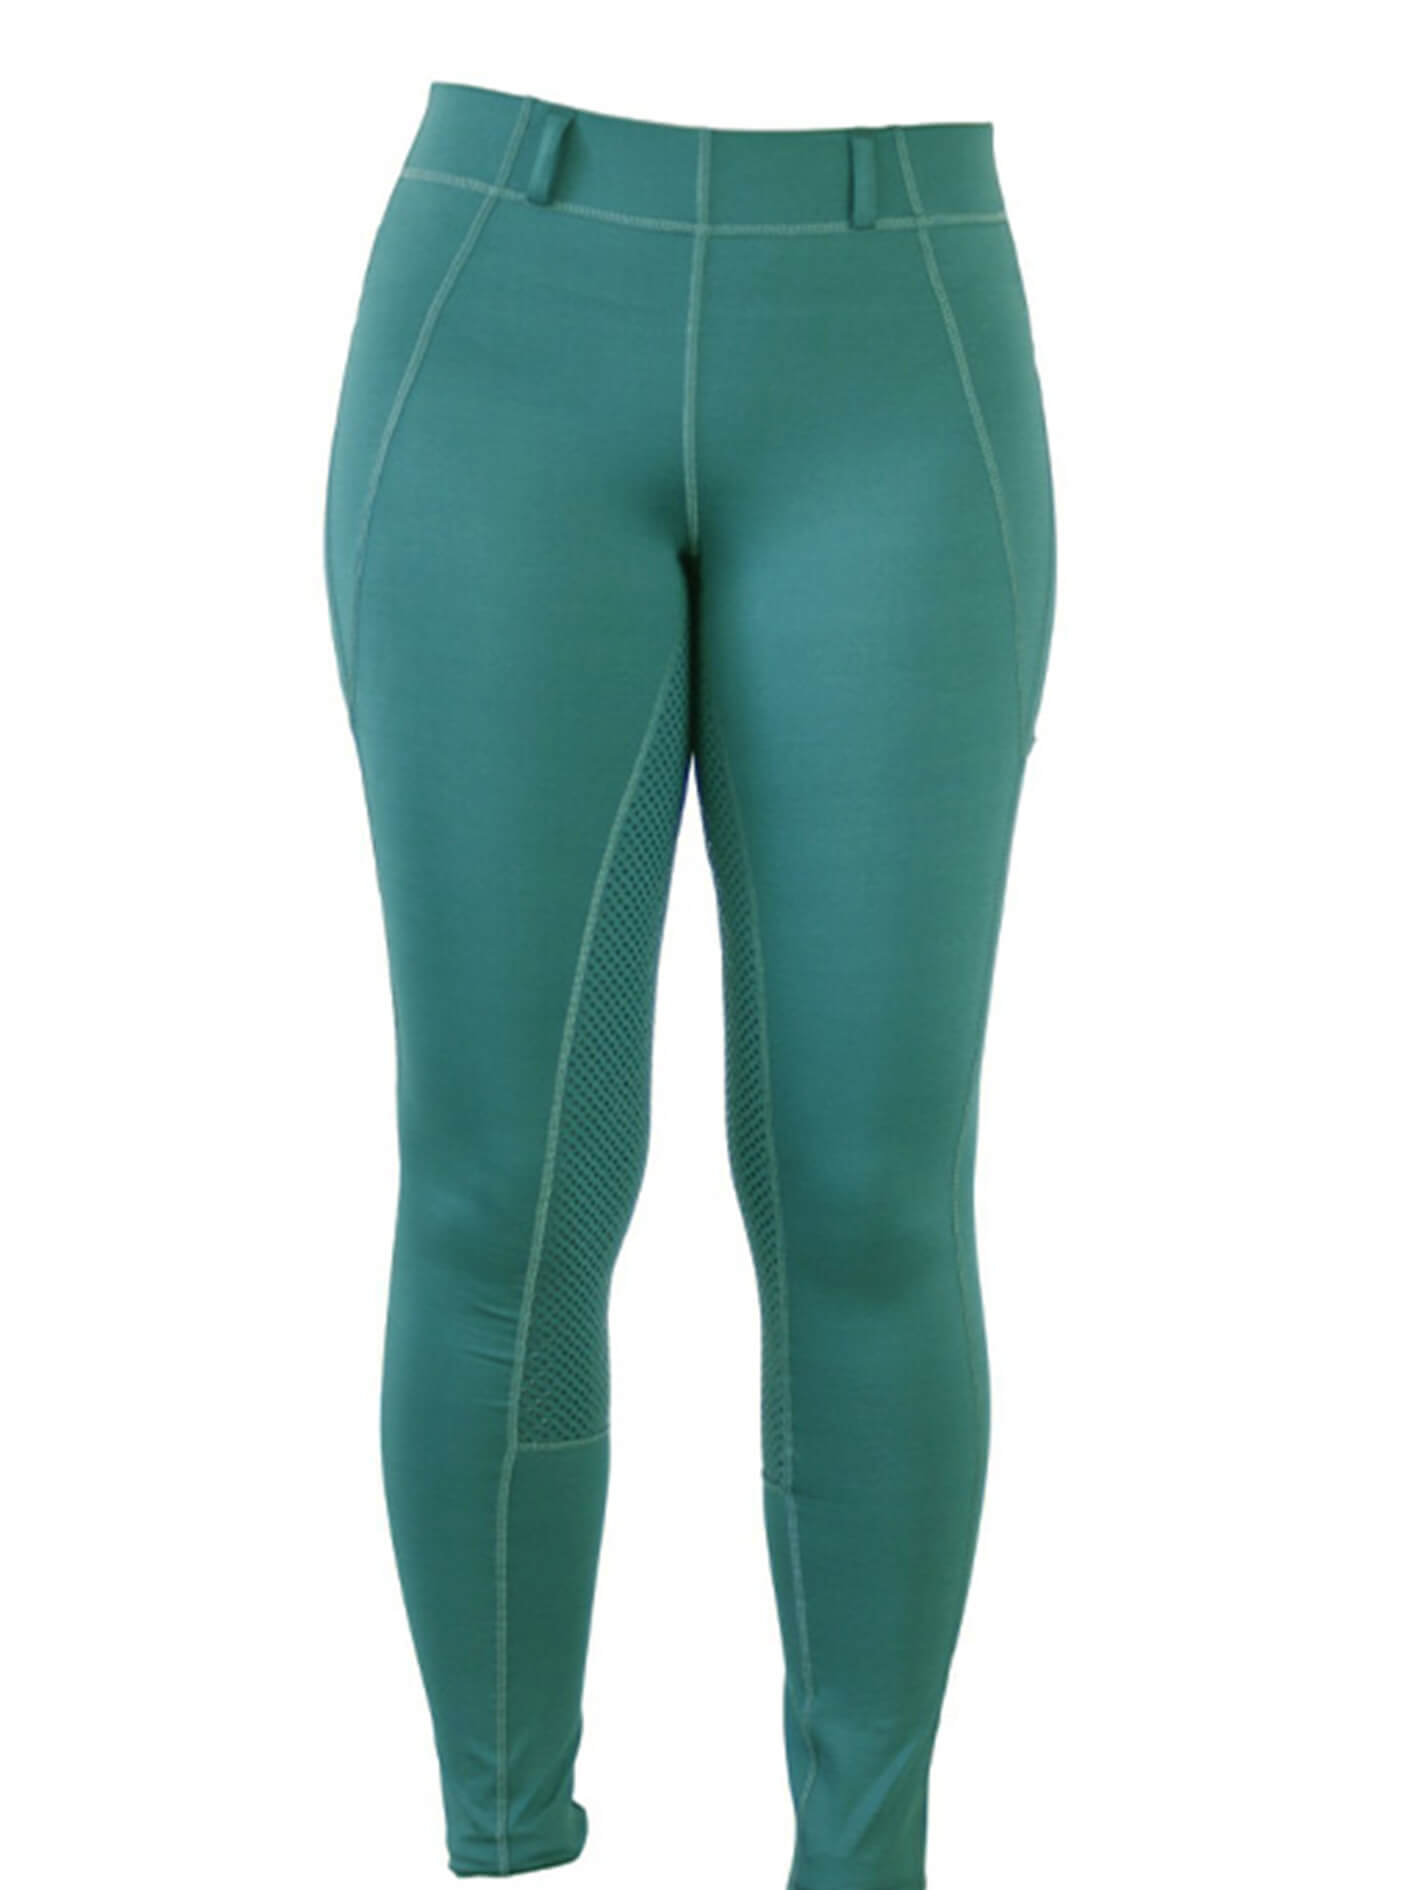 Green horse riding tights with contour seaming and mesh panels.